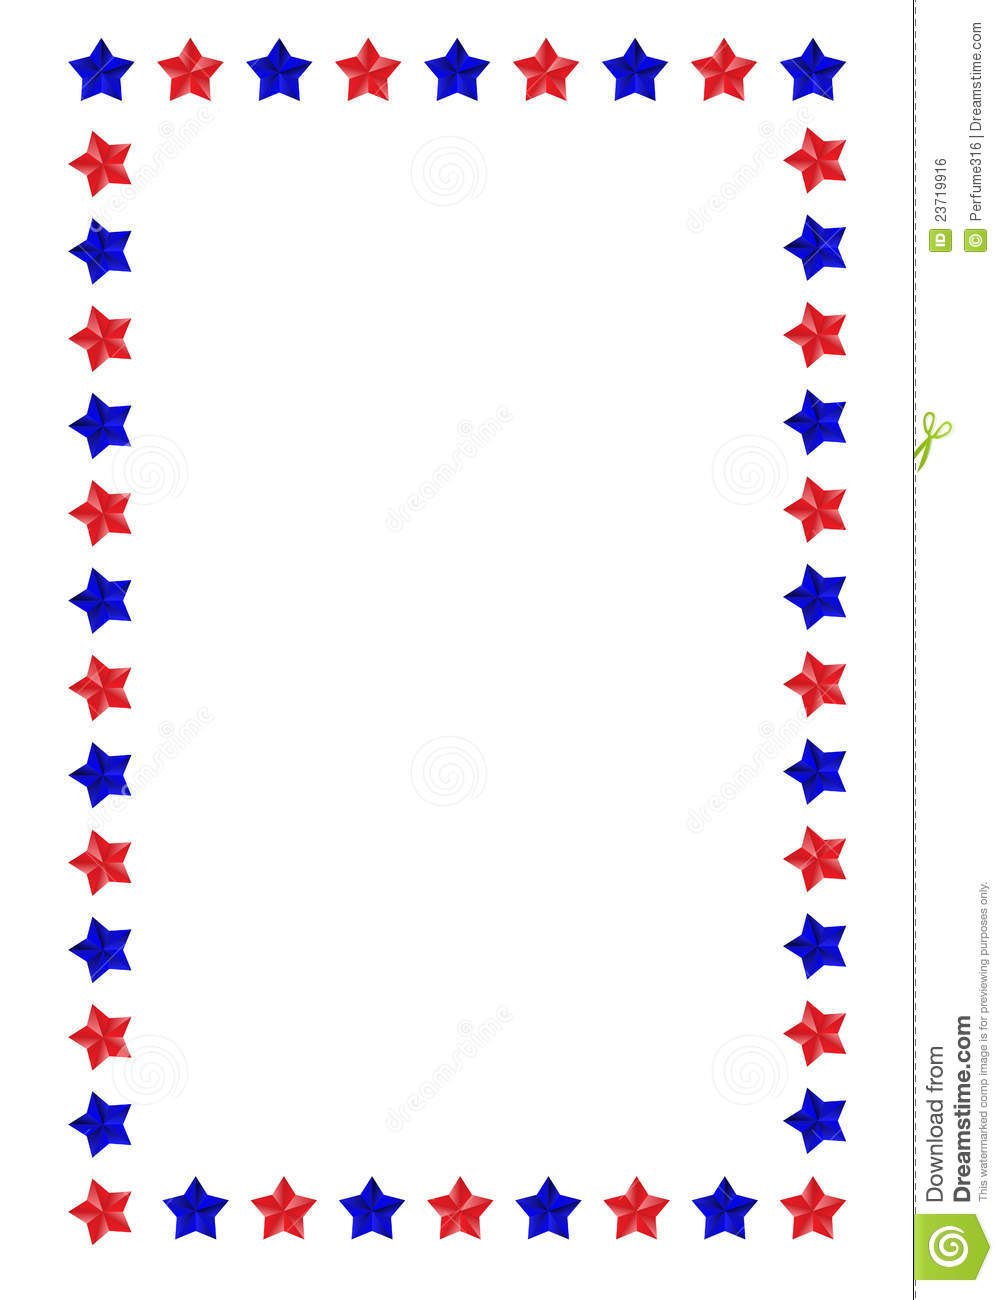 Illustrated Border With Red And Blue Stars Eps File Is Available